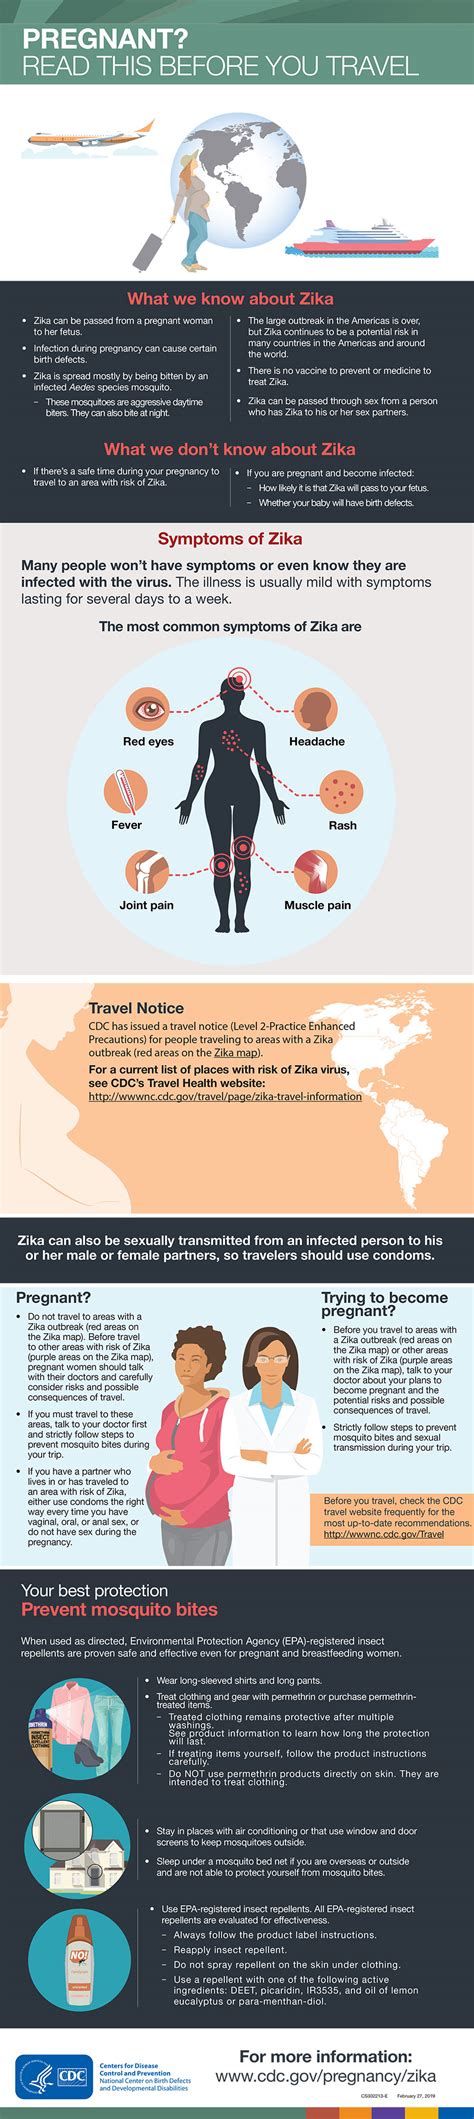 pregnant read this before you travel zika and pregnancy cdc